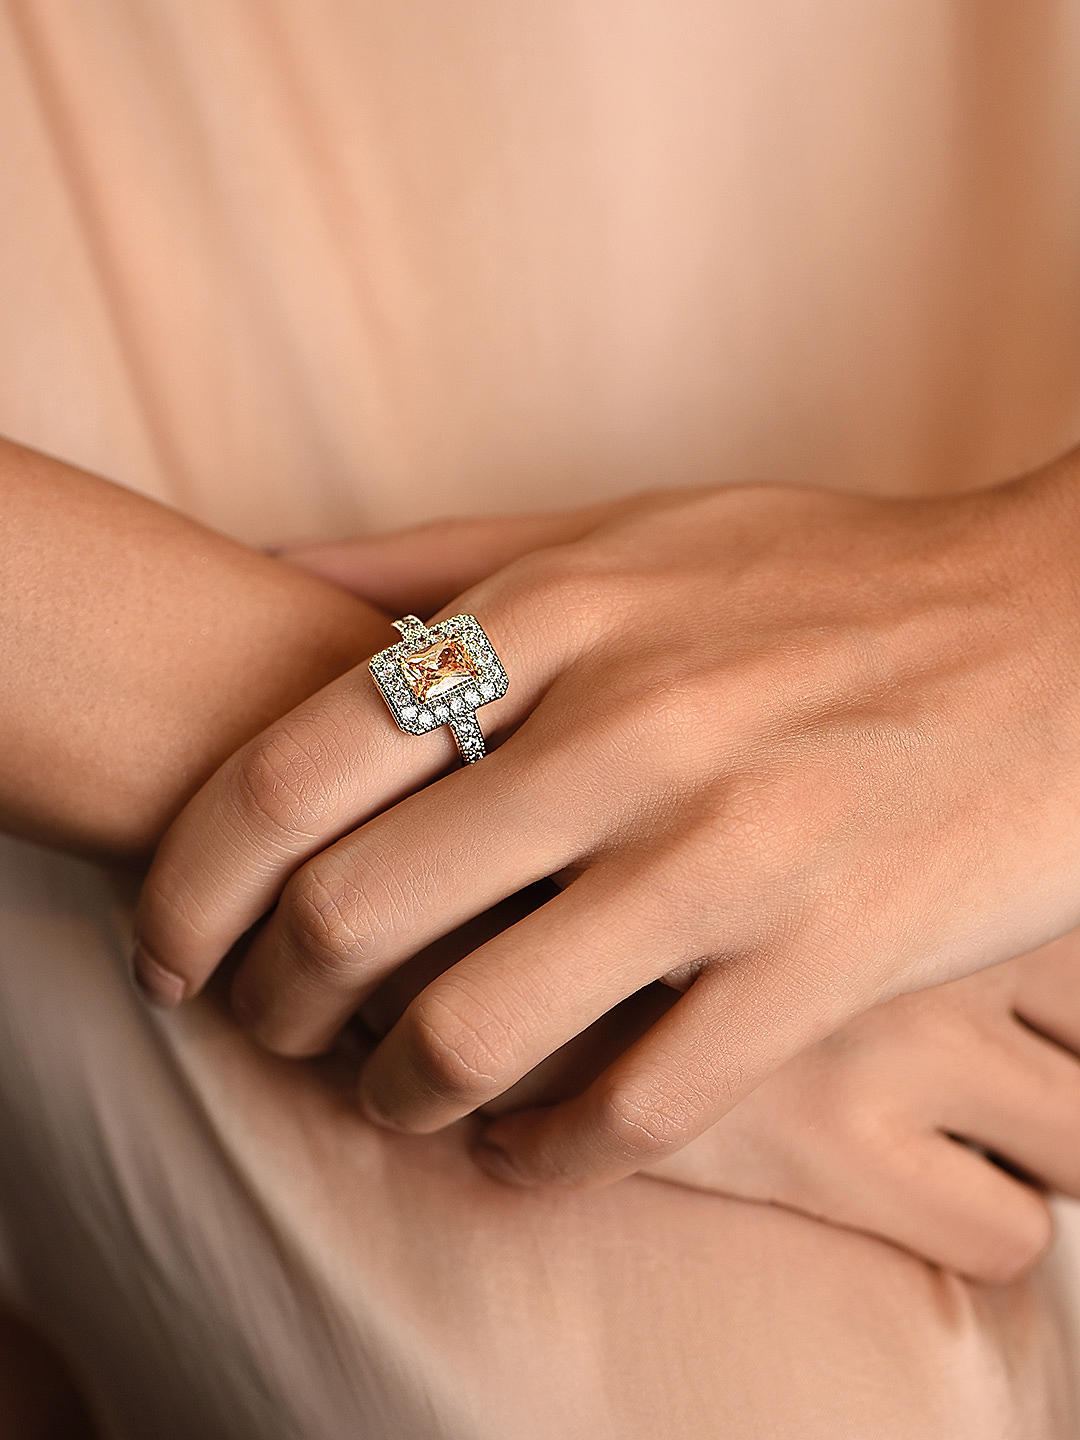 Solitaire Engagement Rings: The Complete Guide